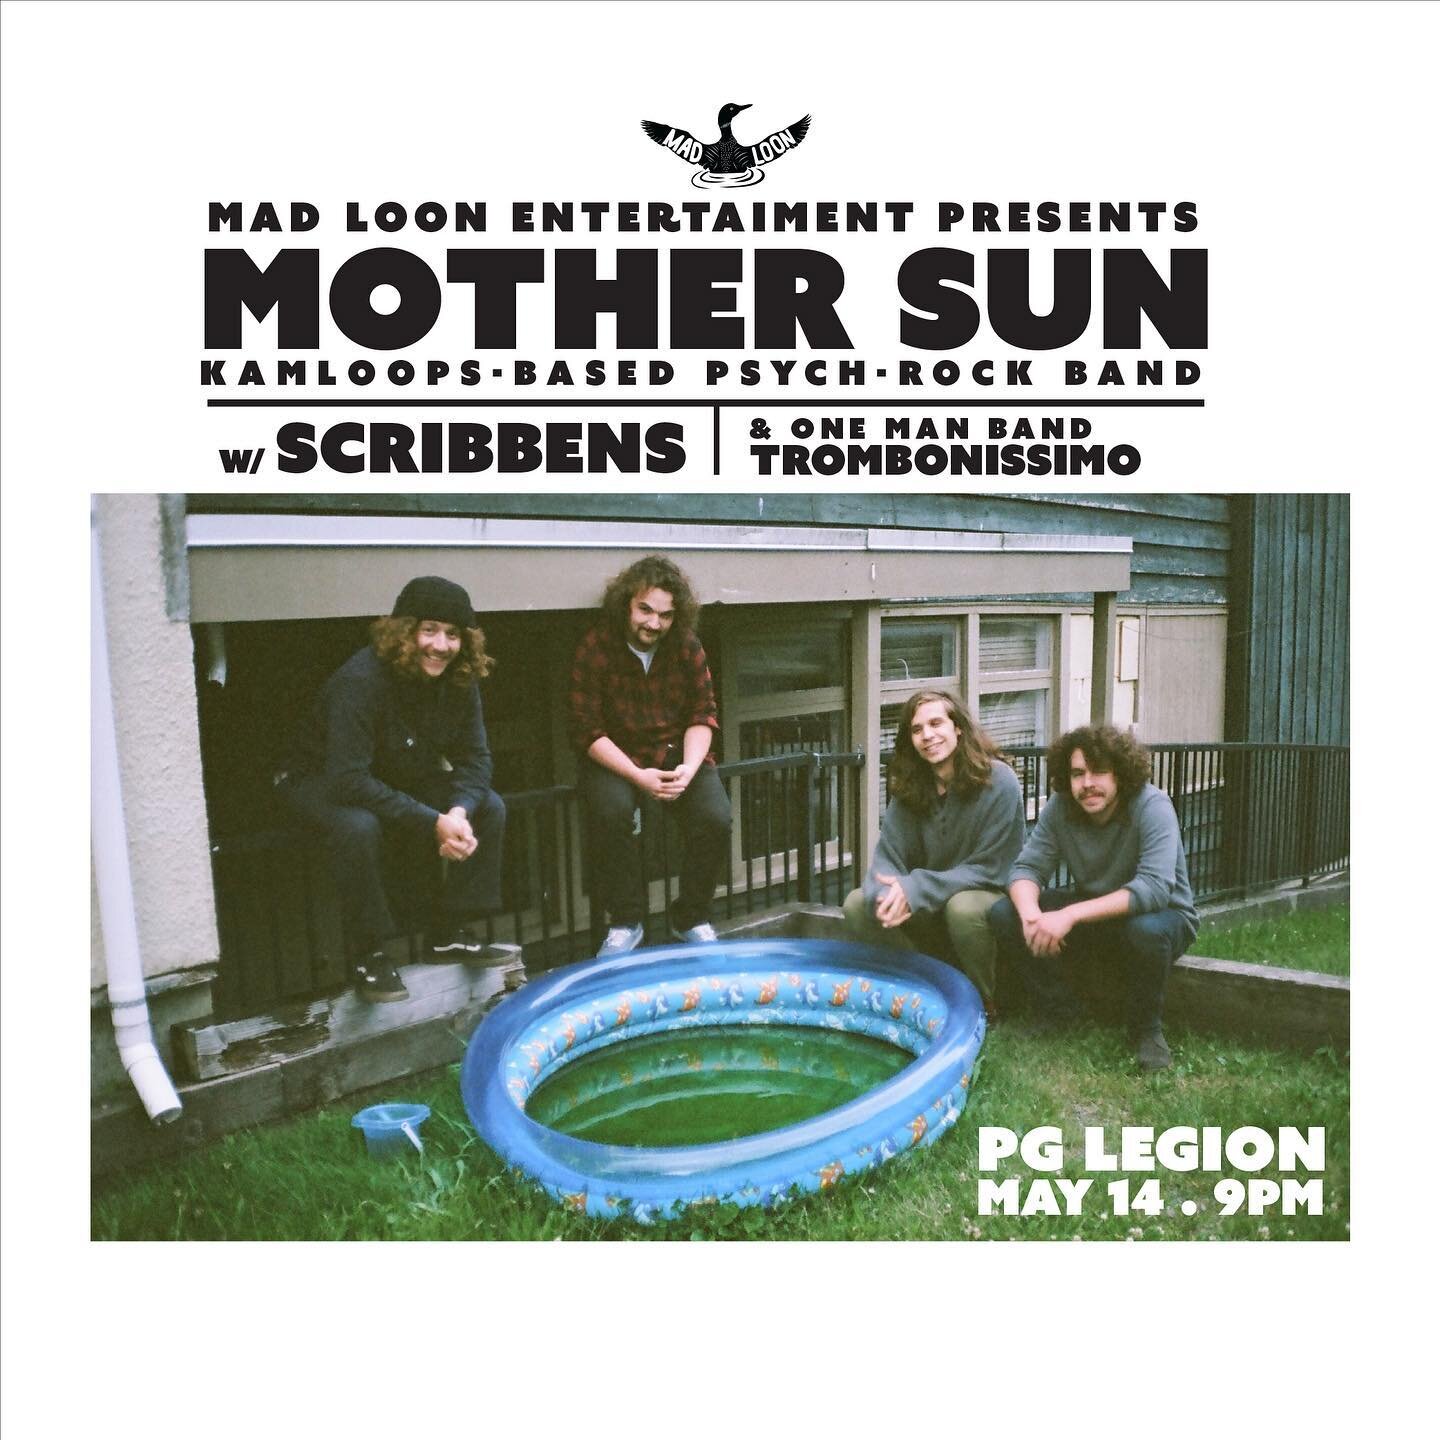 Psych-rock band @mothersunmusic is coming to PG! May 14th with one-man-band @trombonissimo_sound and local progressive punk-rock-poets @scribbensband .  Tickets in bio.
.
@legion43pg #princegeorgebc #madloon #takeonpg #psychrock #mothersun @cfuradiof